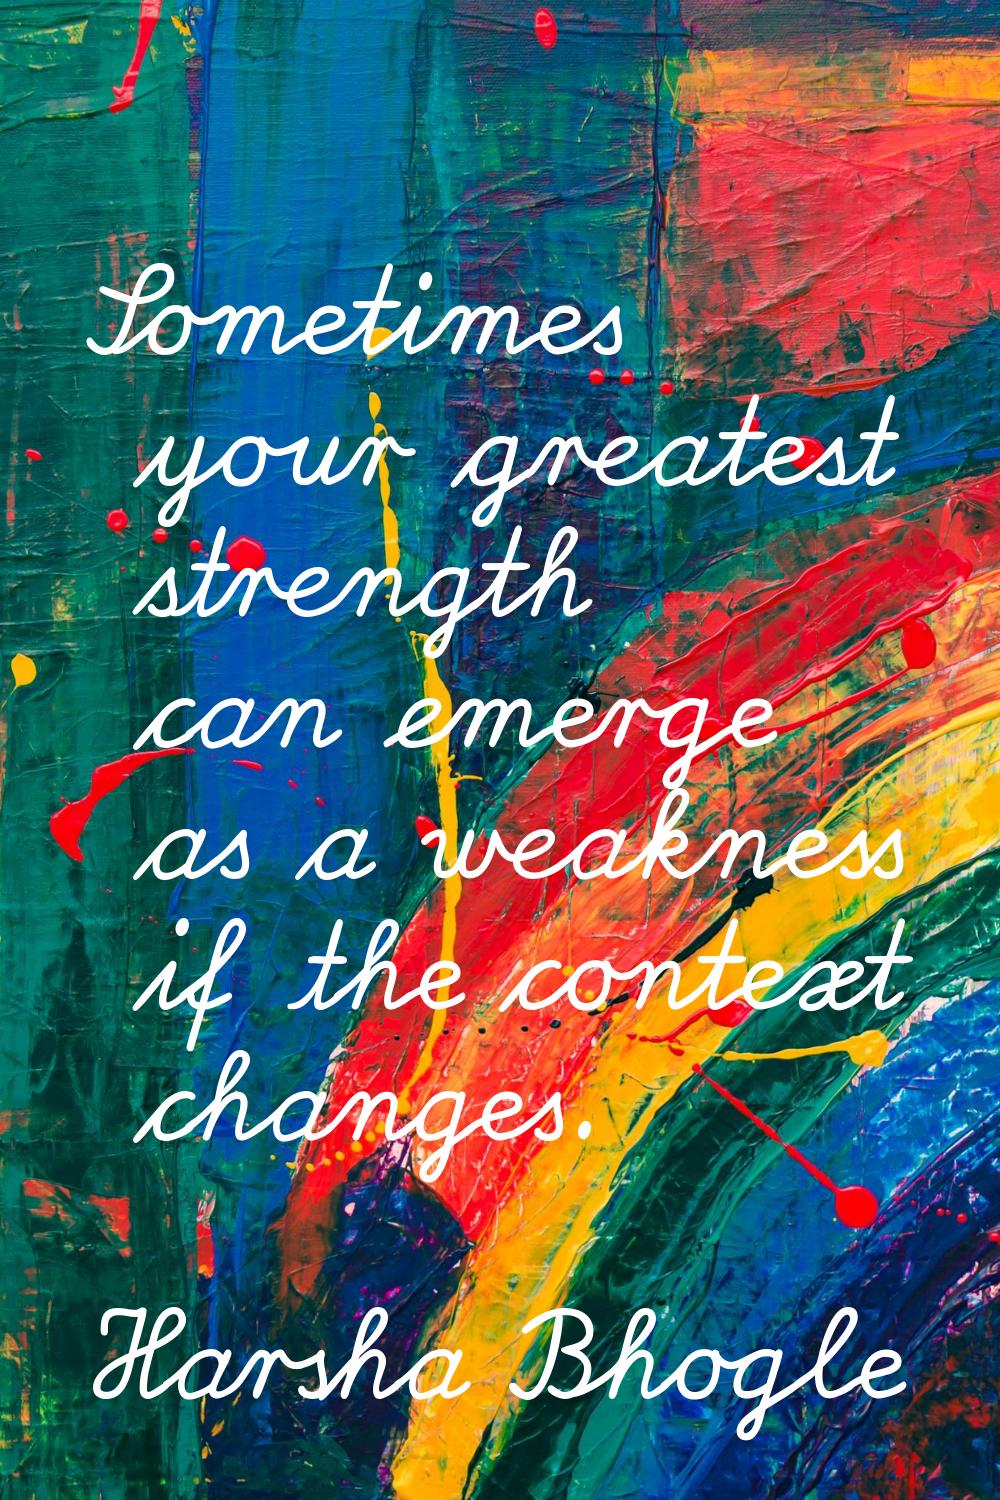 Sometimes your greatest strength can emerge as a weakness if the context changes.